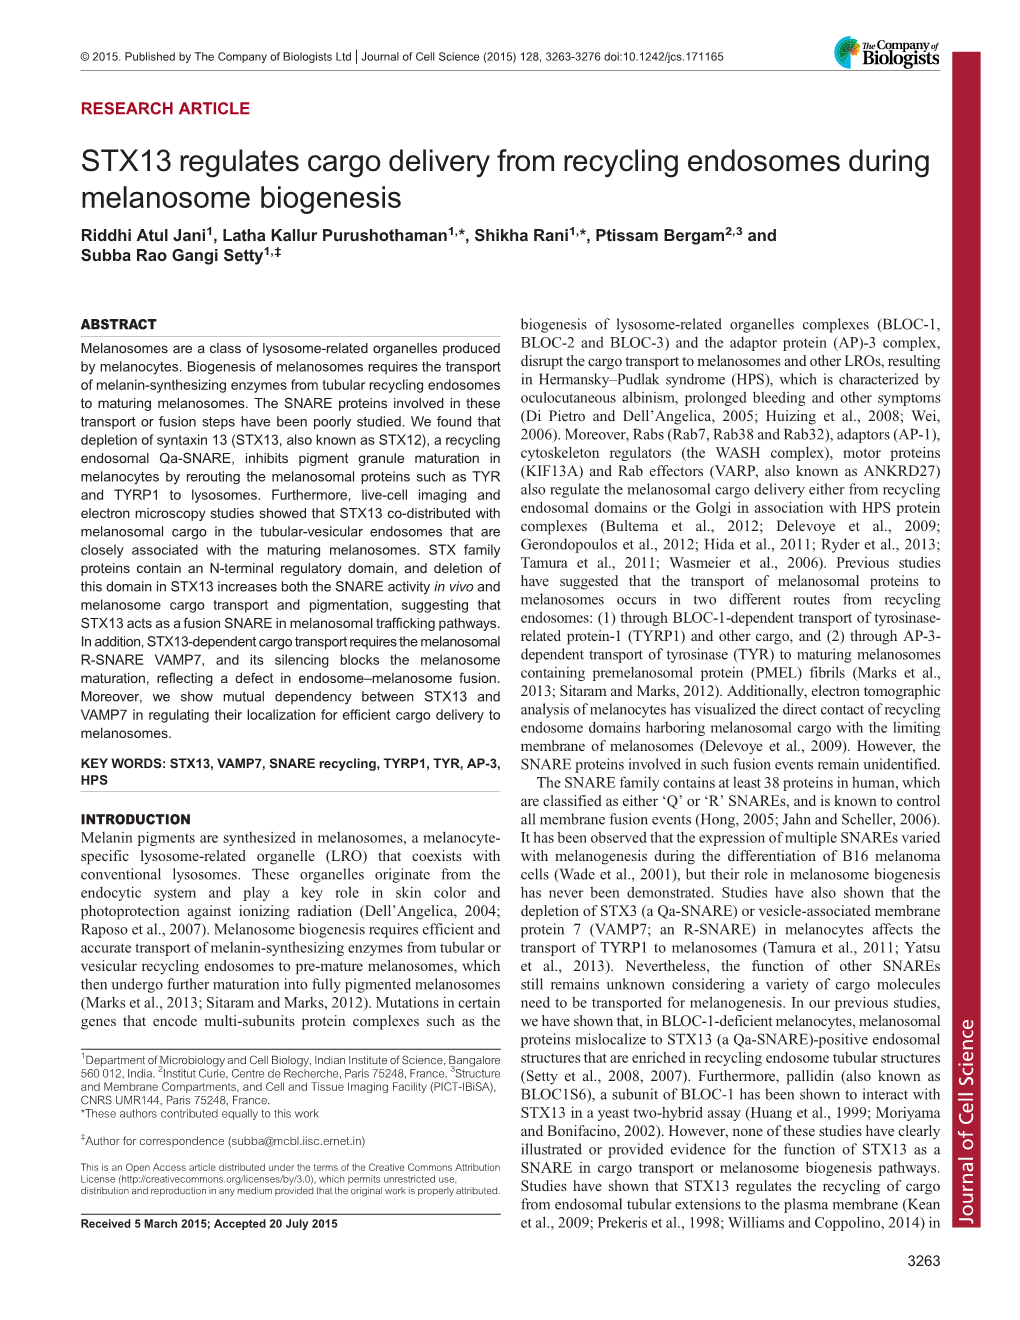 STX13 Regulates Cargo Delivery from Recycling Endosomes During